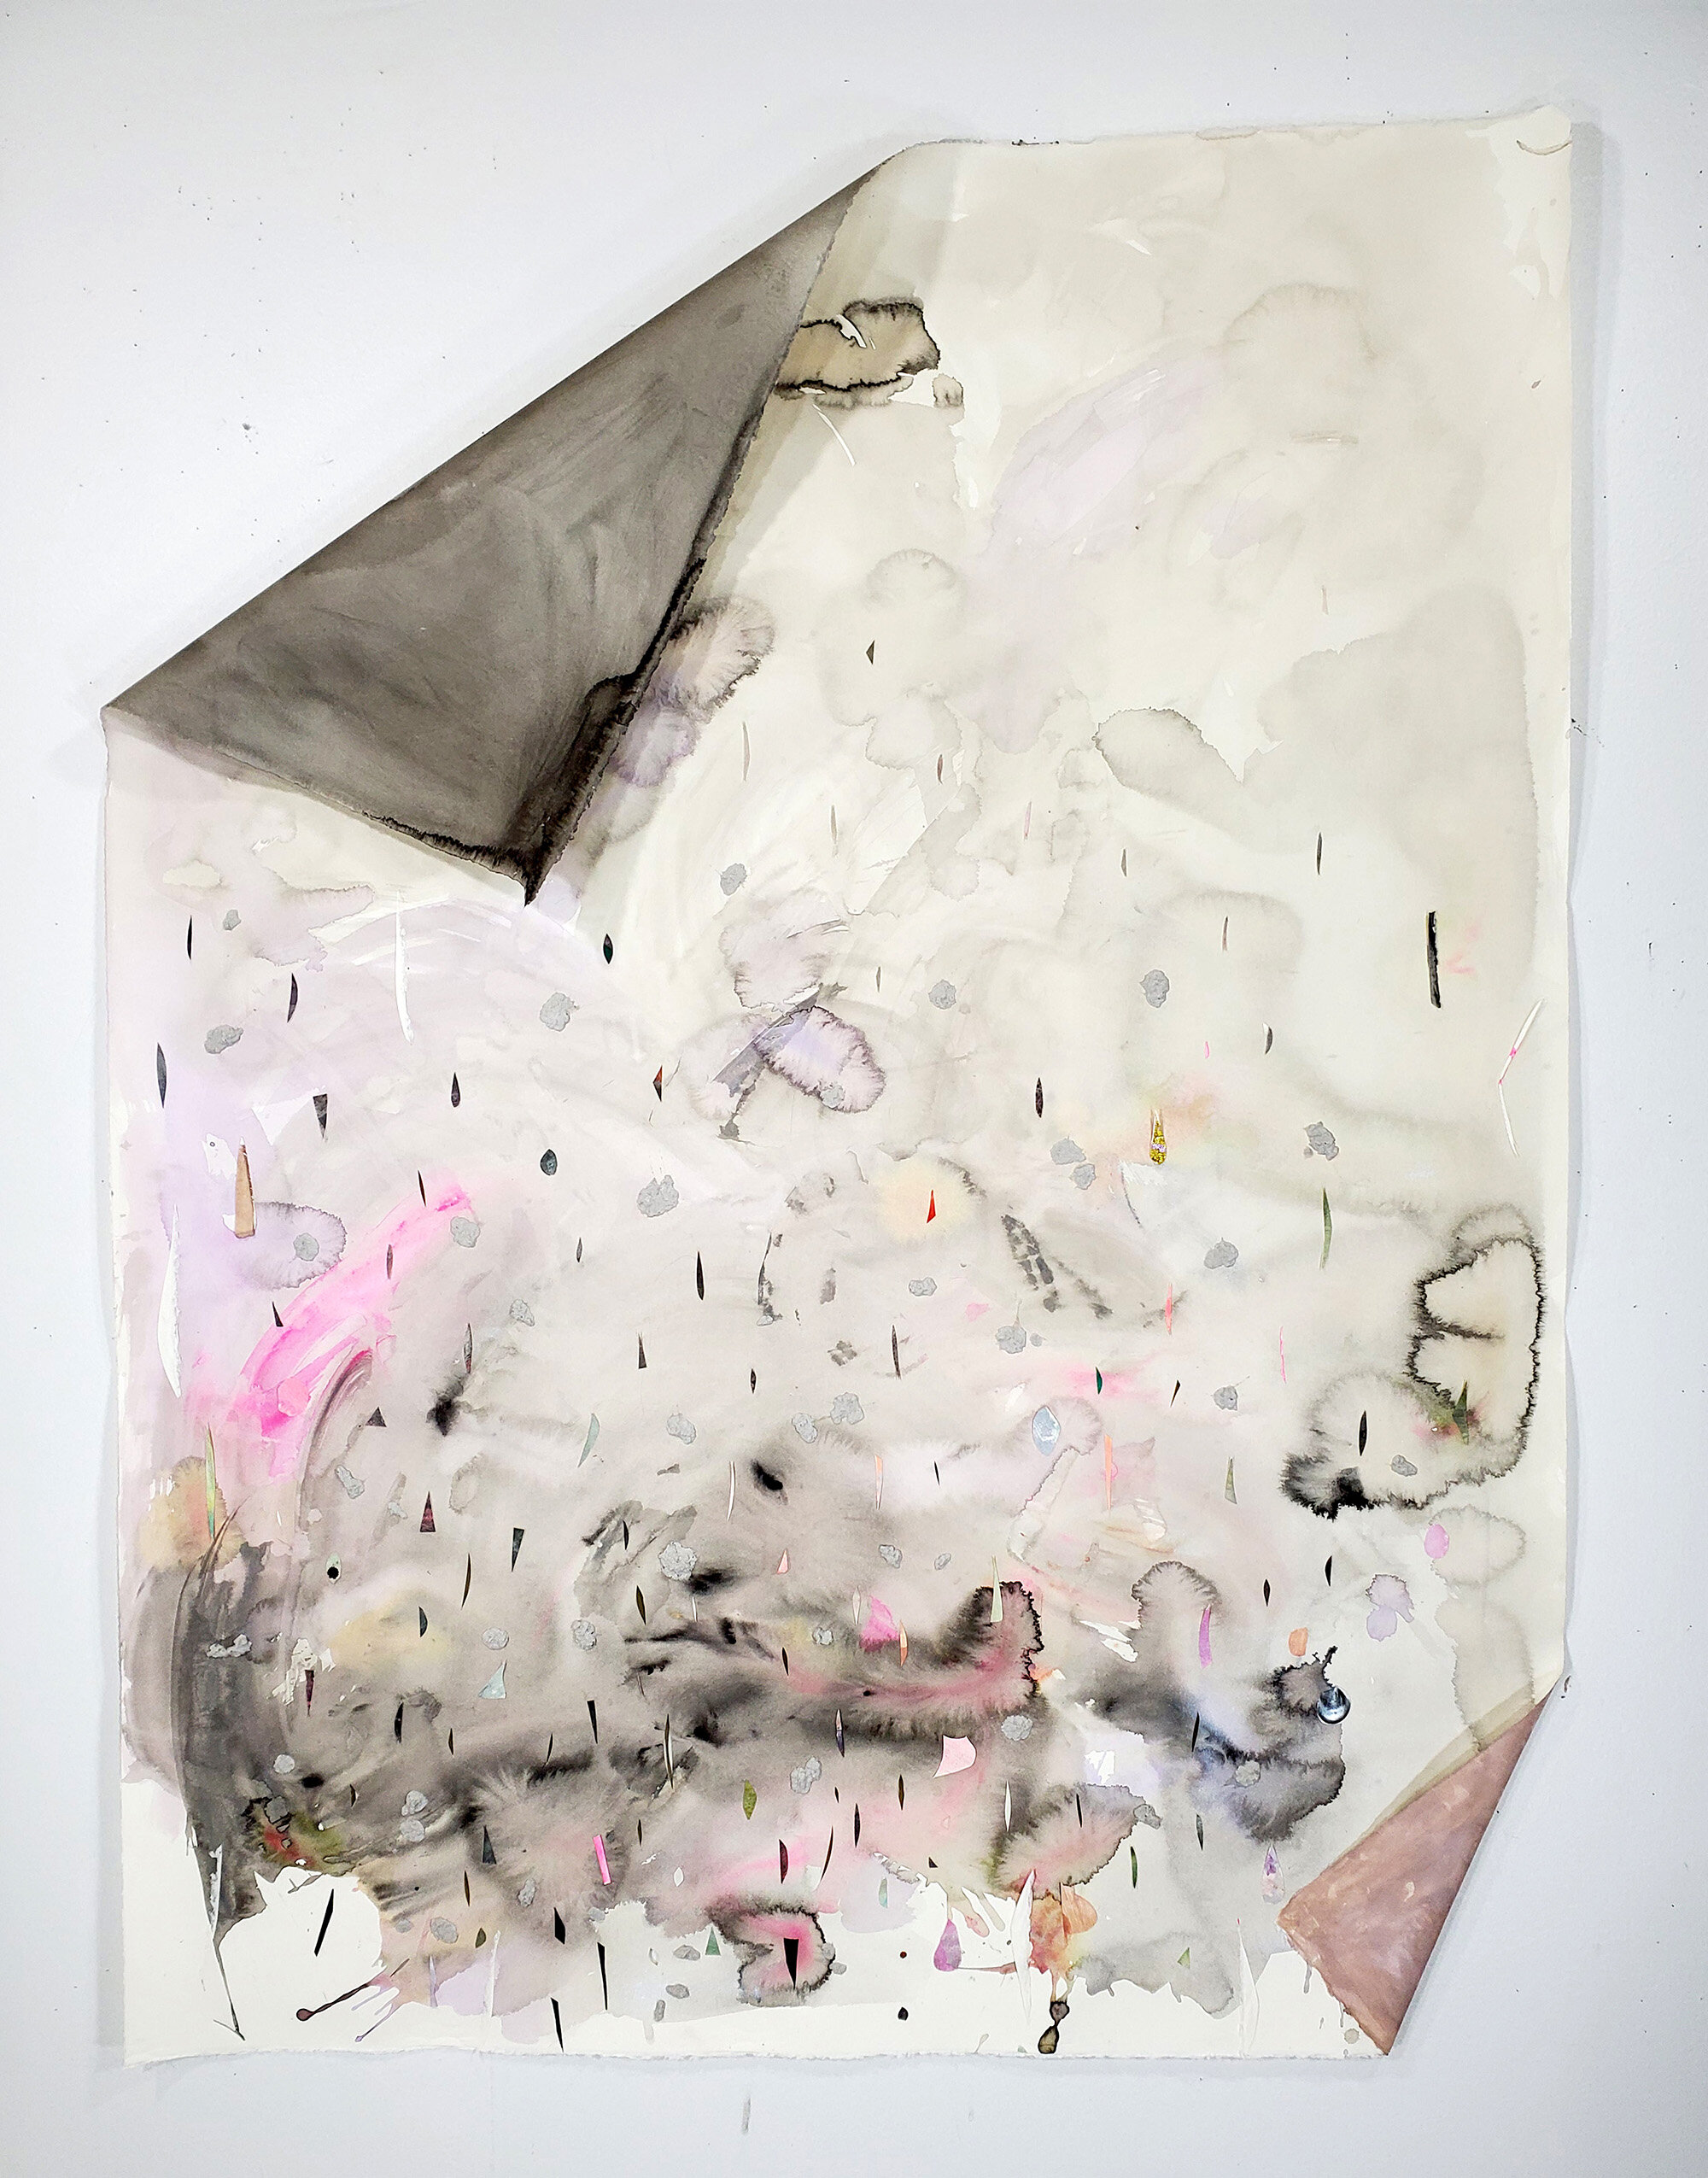   A Hard Rain , 2020 Graphite powder, gouache, acrylic, flashe, spray paint, glitter paint and paper pulp on cut and folded paper 55 x 42 1/2 x 3 inches 